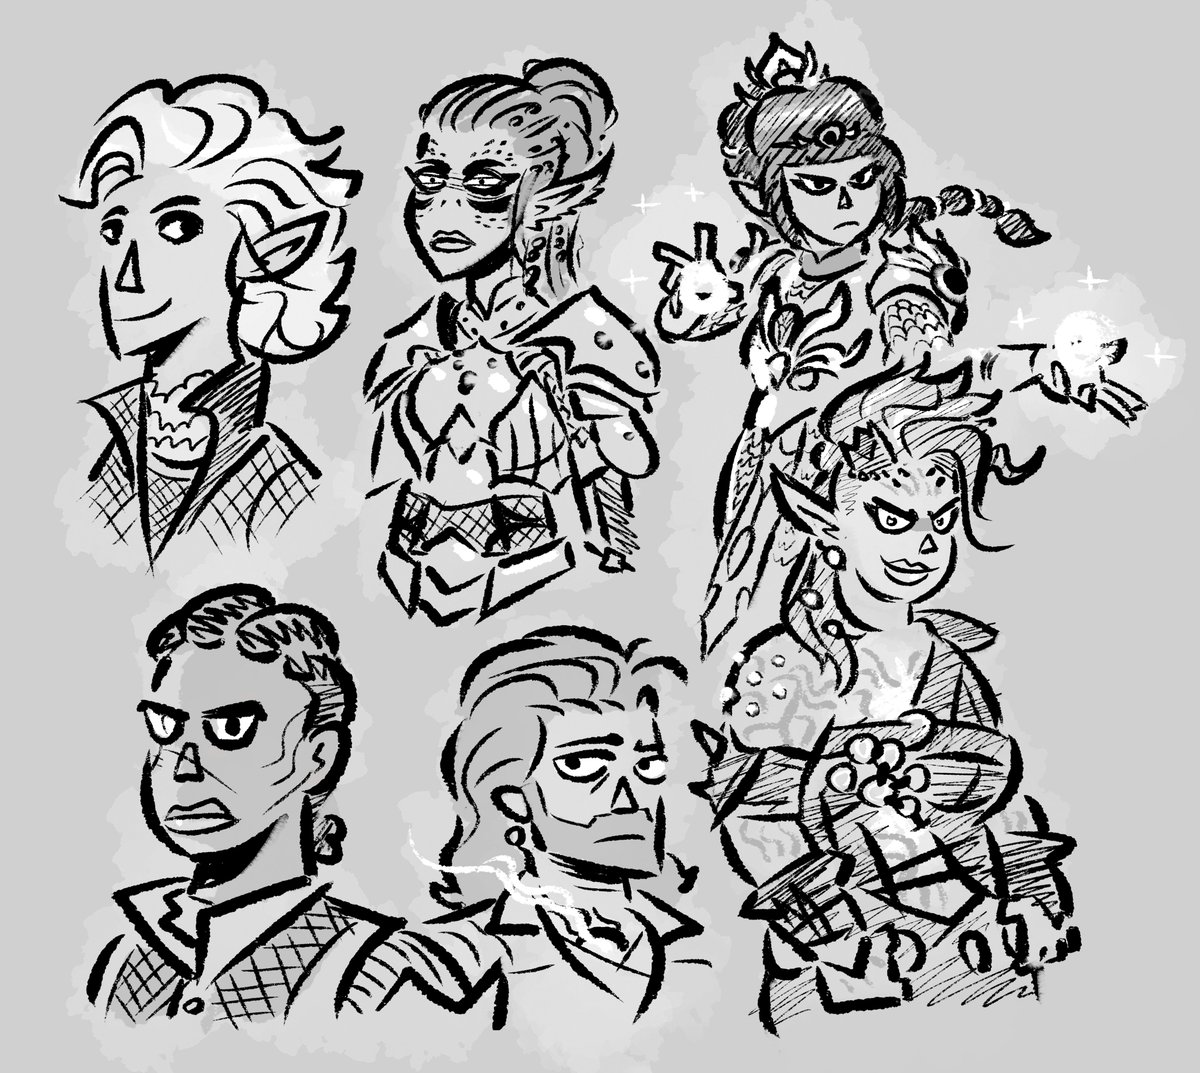 Ok, I have this week and this week only to work on my Baldur's Gate 3 print before all my upcoming cons. Here are some quick character doodles before I get started on the big illustration. Wish me luck as I buckle down!